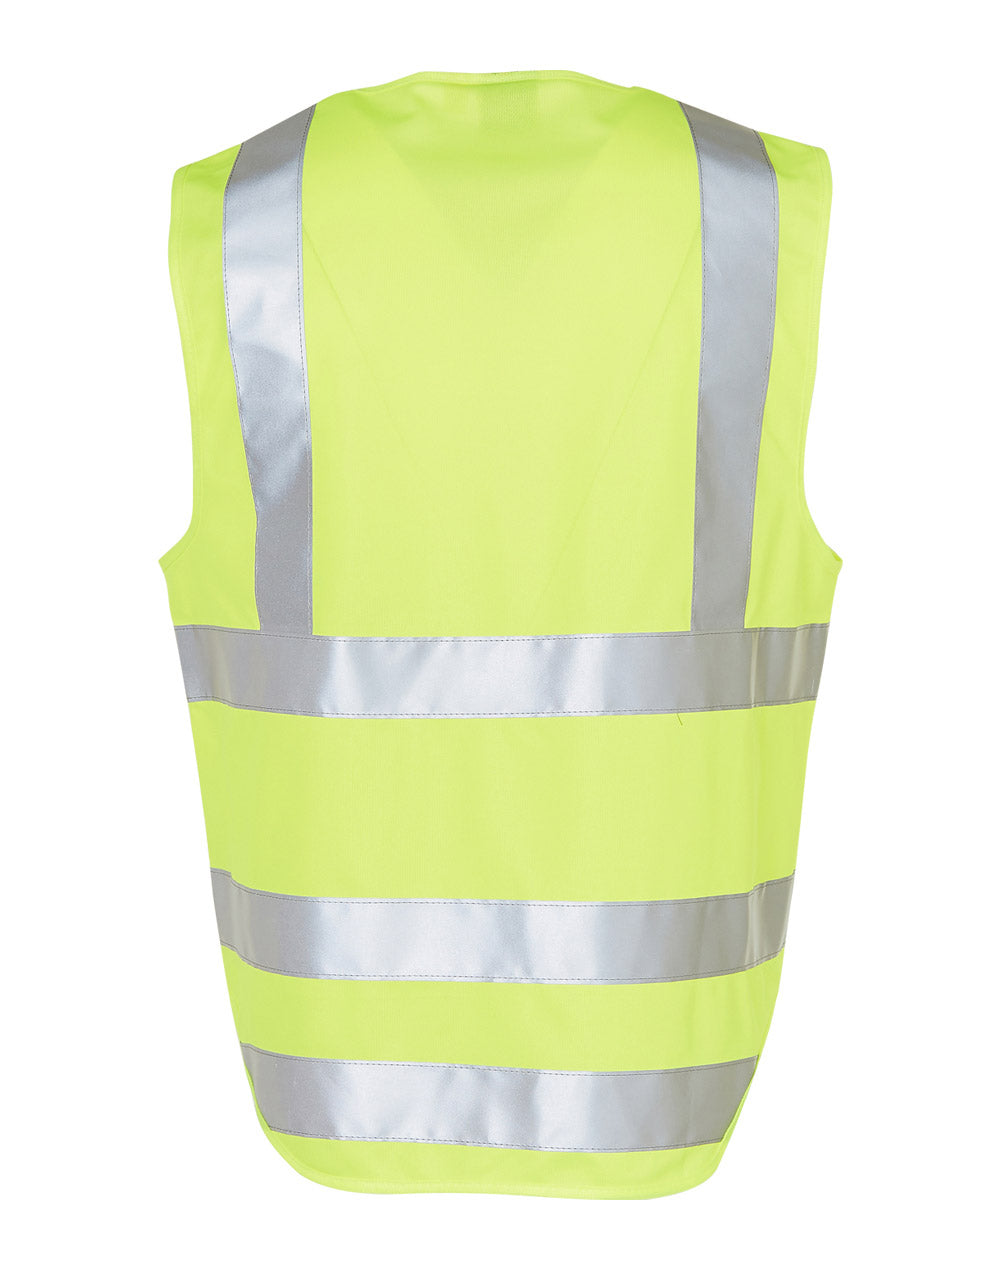 Hivis Day Night Safetyvest Id Pocket - made by AIW